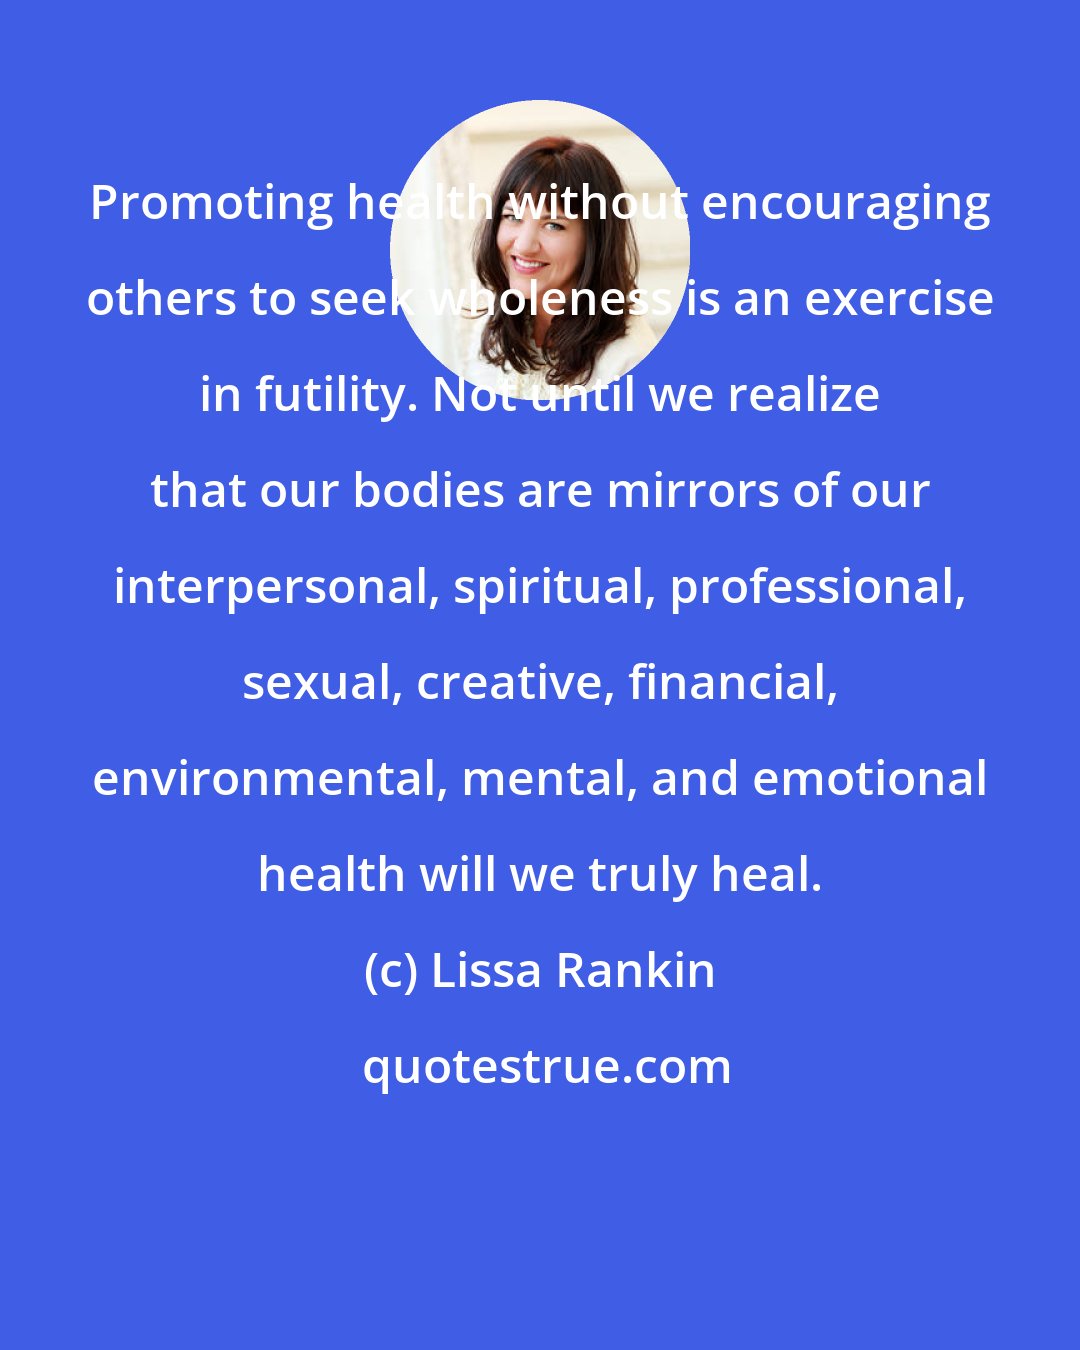 Lissa Rankin: Promoting health without encouraging others to seek wholeness is an exercise in futility. Not until we realize that our bodies are mirrors of our interpersonal, spiritual, professional, sexual, creative, financial, environmental, mental, and emotional health will we truly heal.